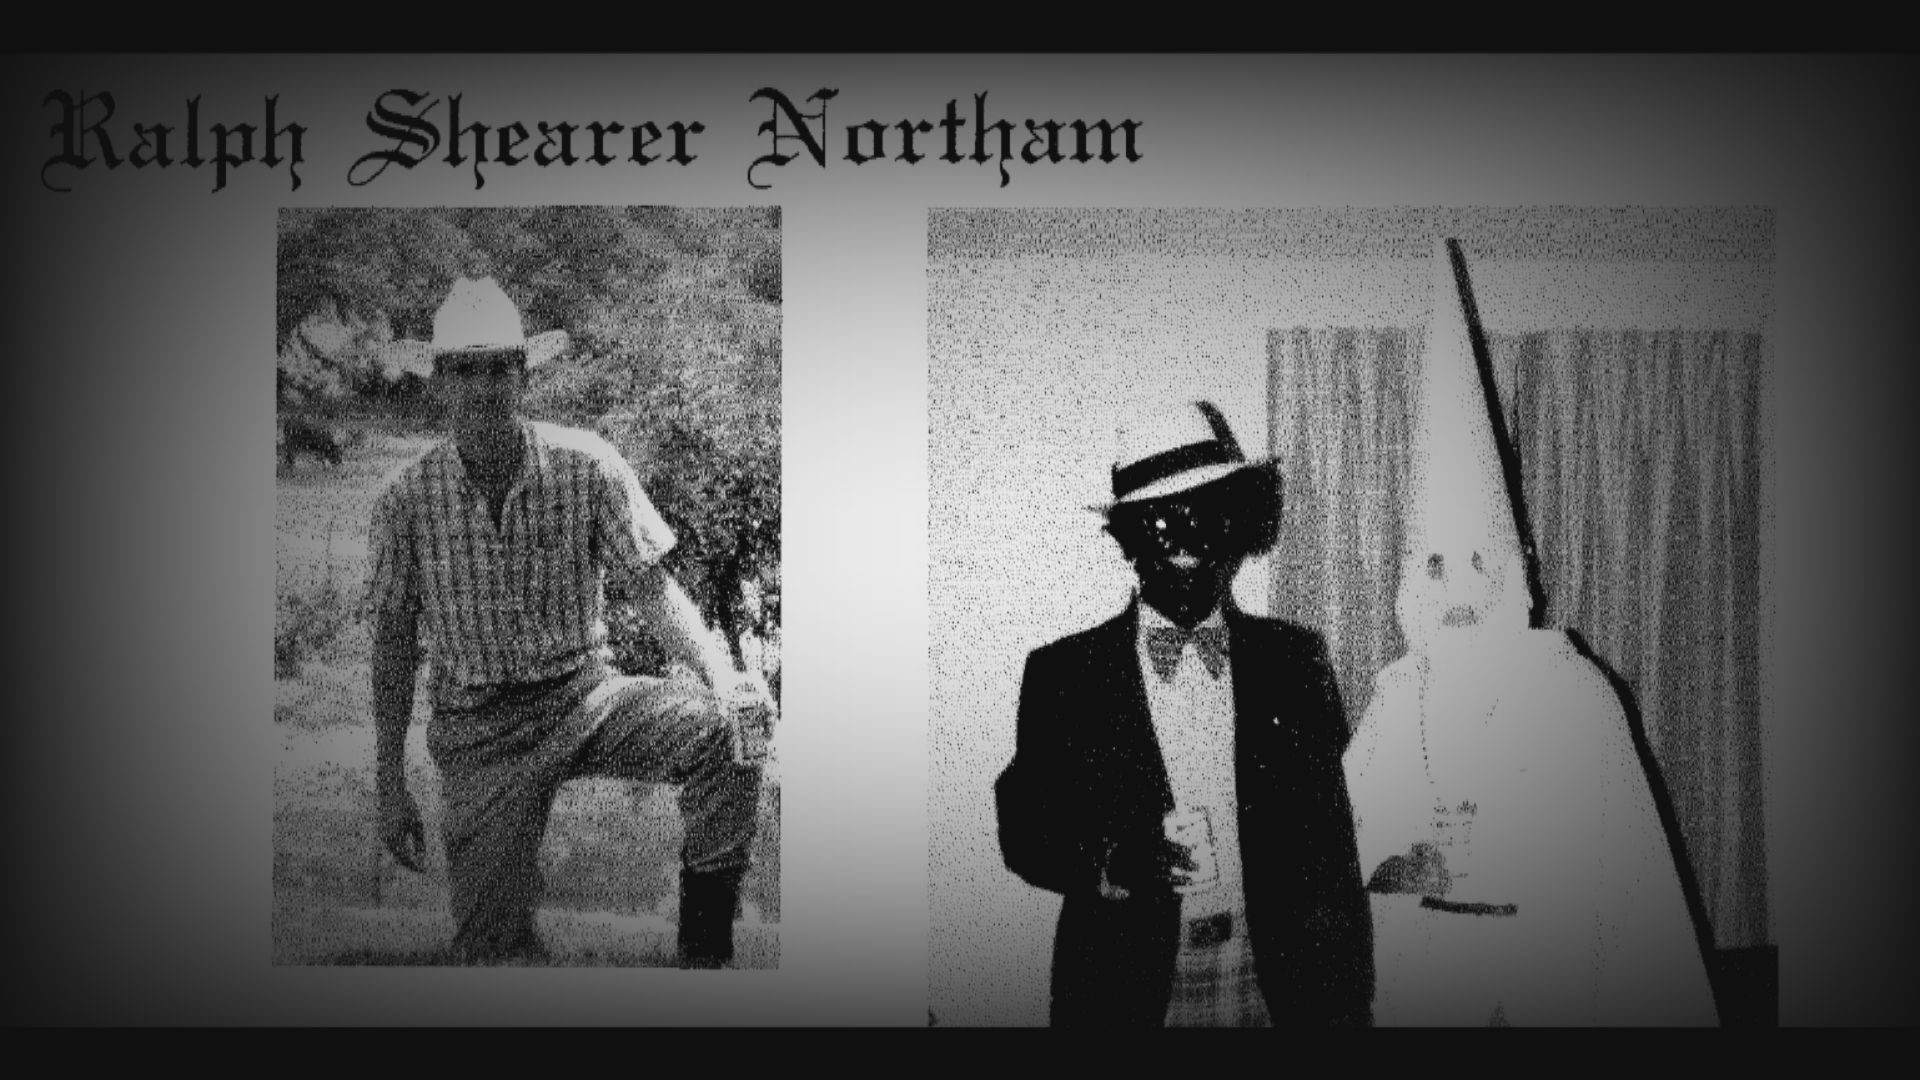 After investigating the racist photo found on Gov. Northam's yearbook page, lawyers say their results are inconclusive. Mike Valerio has the latest.